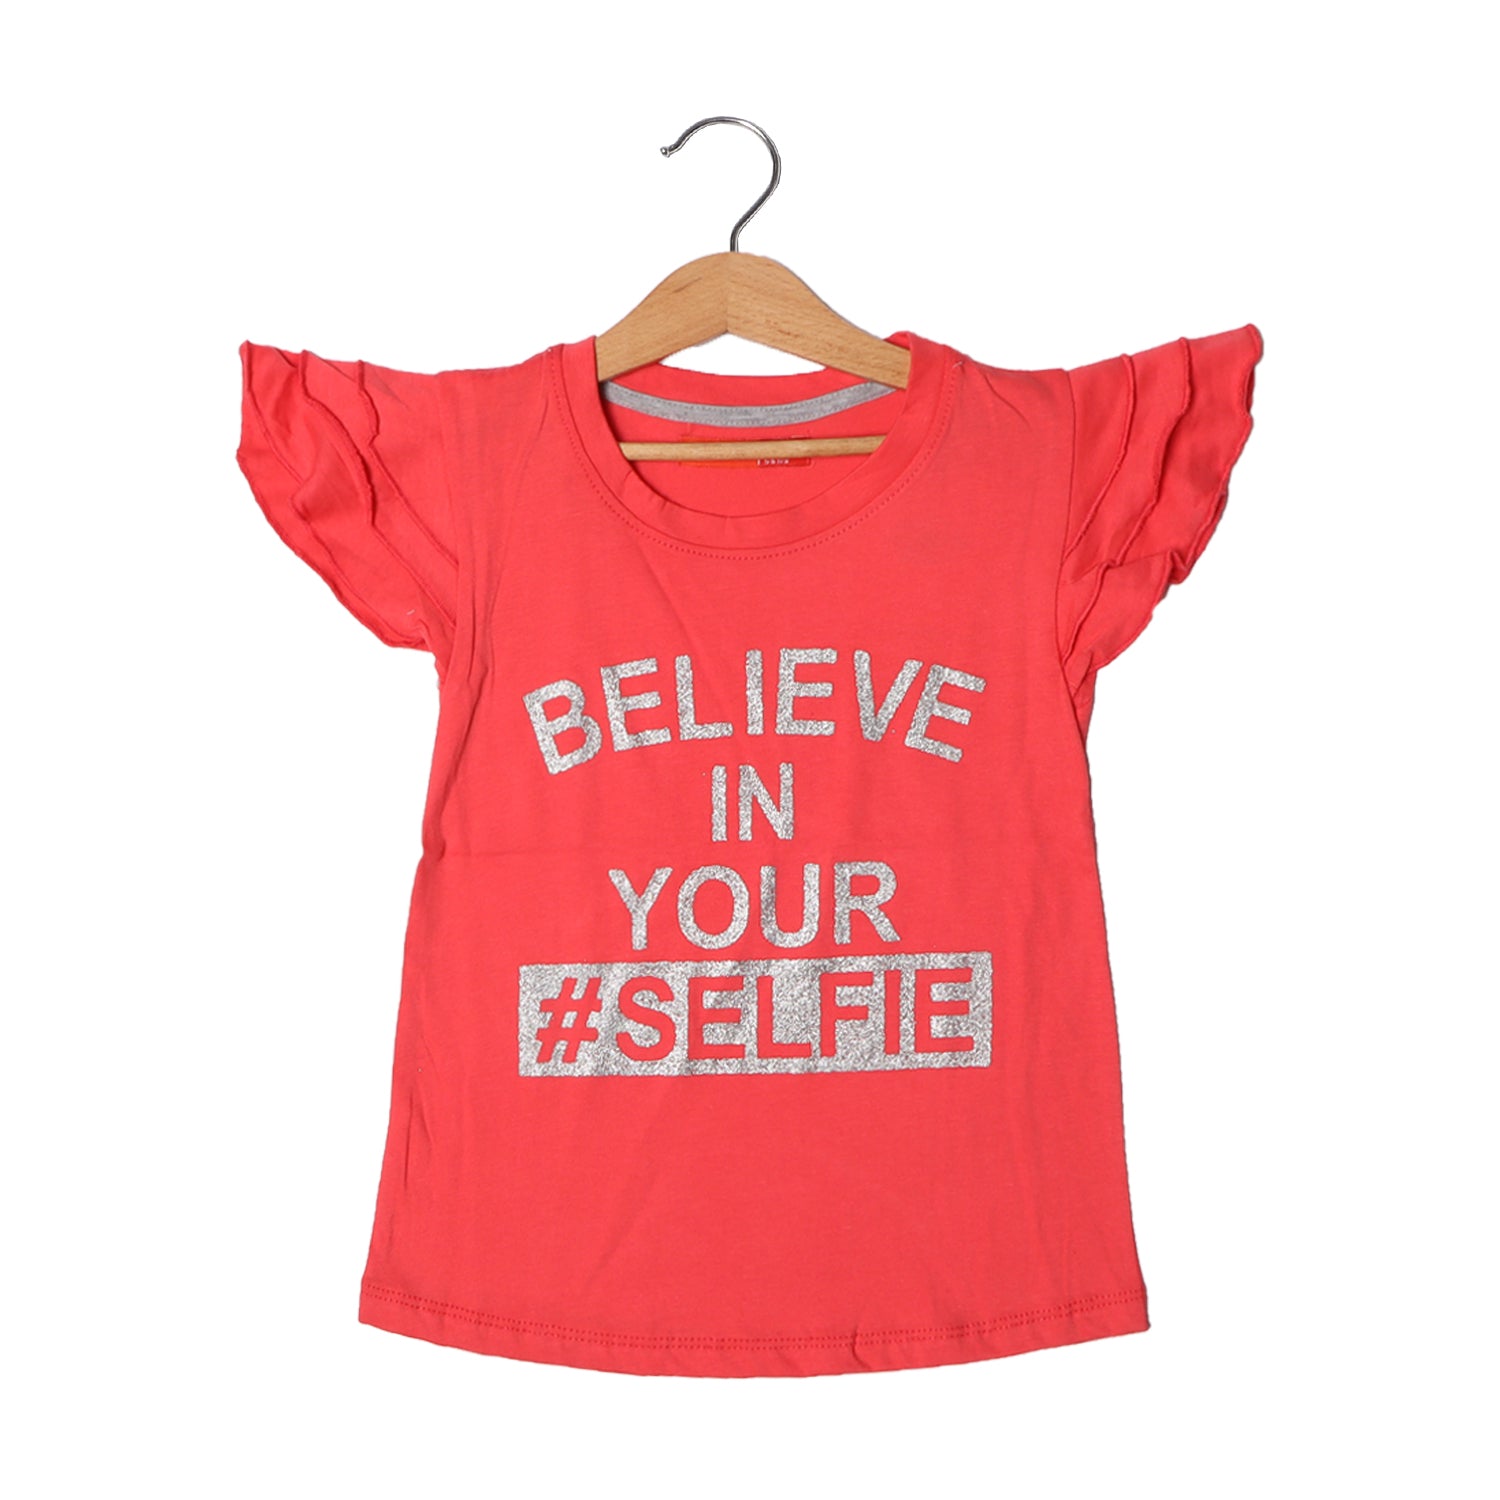 WATERMELON RED BELIEVE IN YOUR SELFIE PRINTED T-SHIRT FOR GIRLS